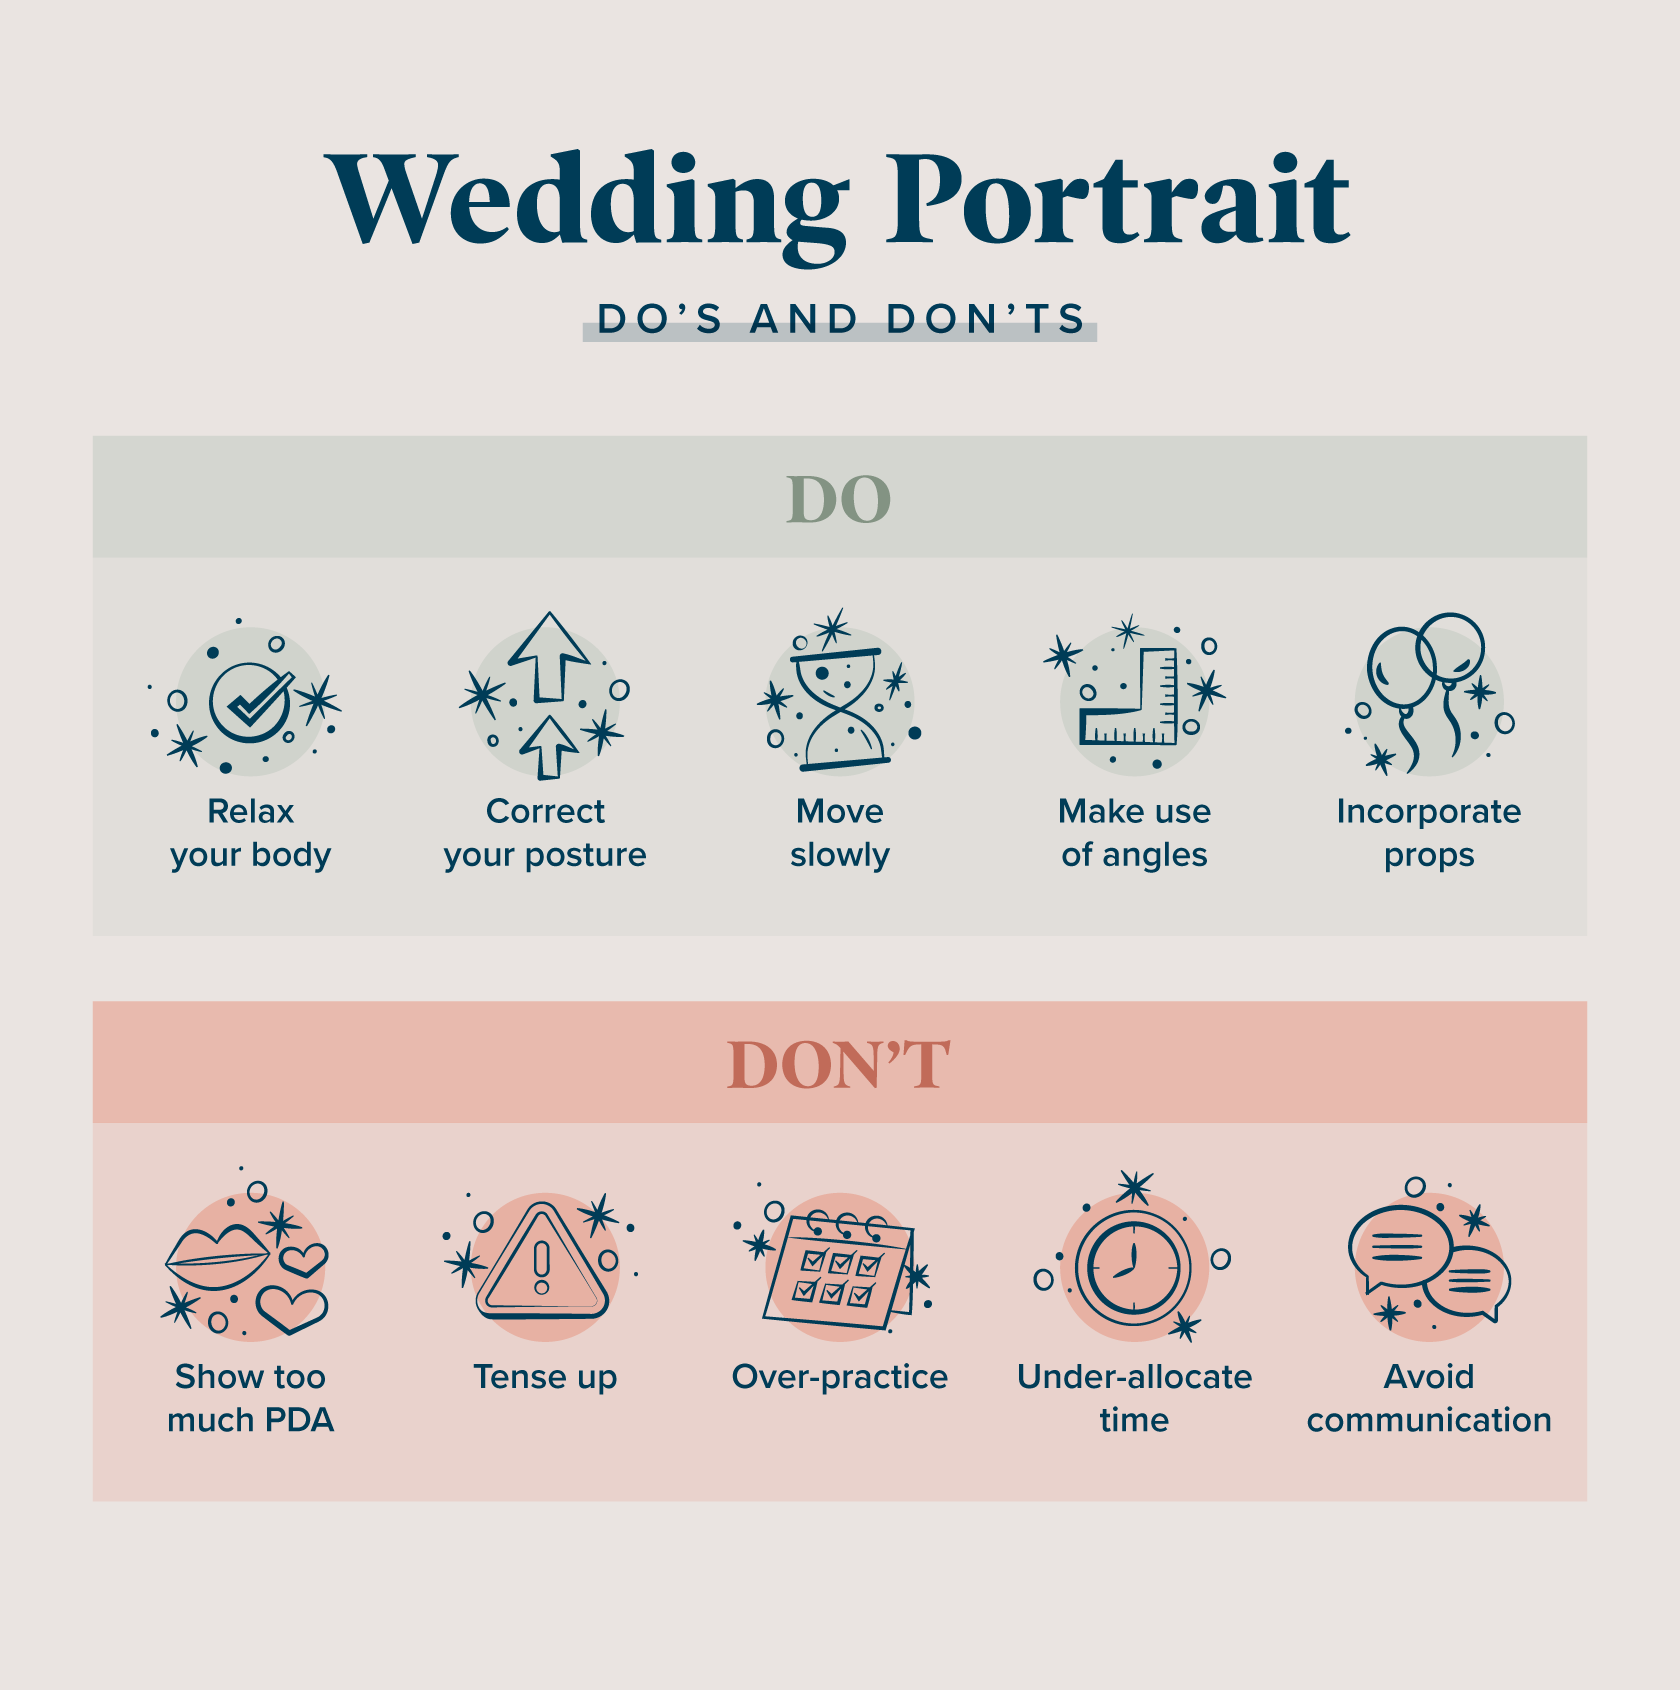 wedding-portrait-dos-and-donts